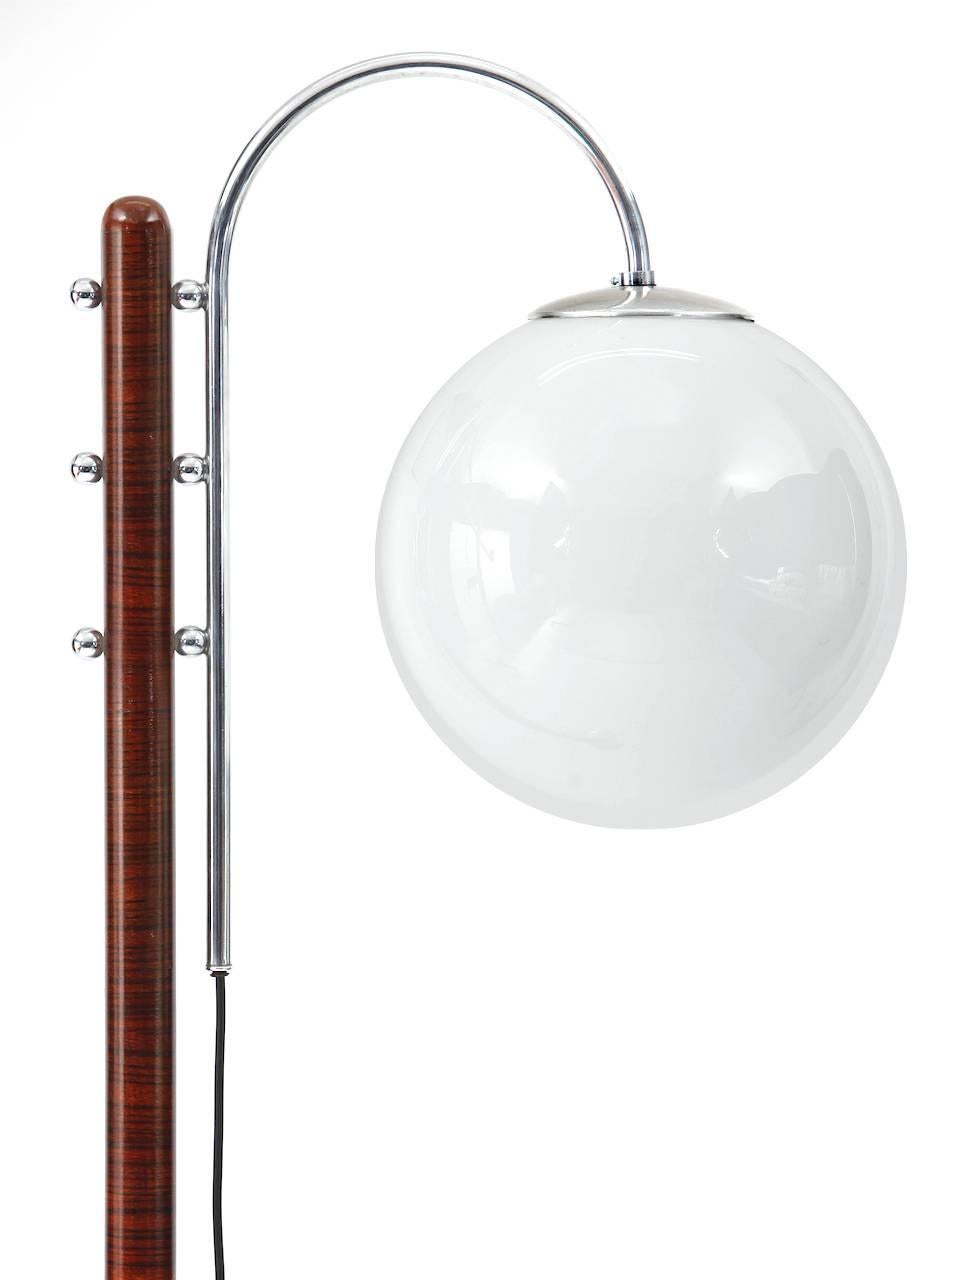 Rare floor lamp by Jindrich Halabala from the 1930s
Very rare floor lamp designed by Jindrich Halabala in the 1930s.
Heavy chromed metal base with a walnut stem and a glass globe.
Chromed steel in good condition with a nice patina.